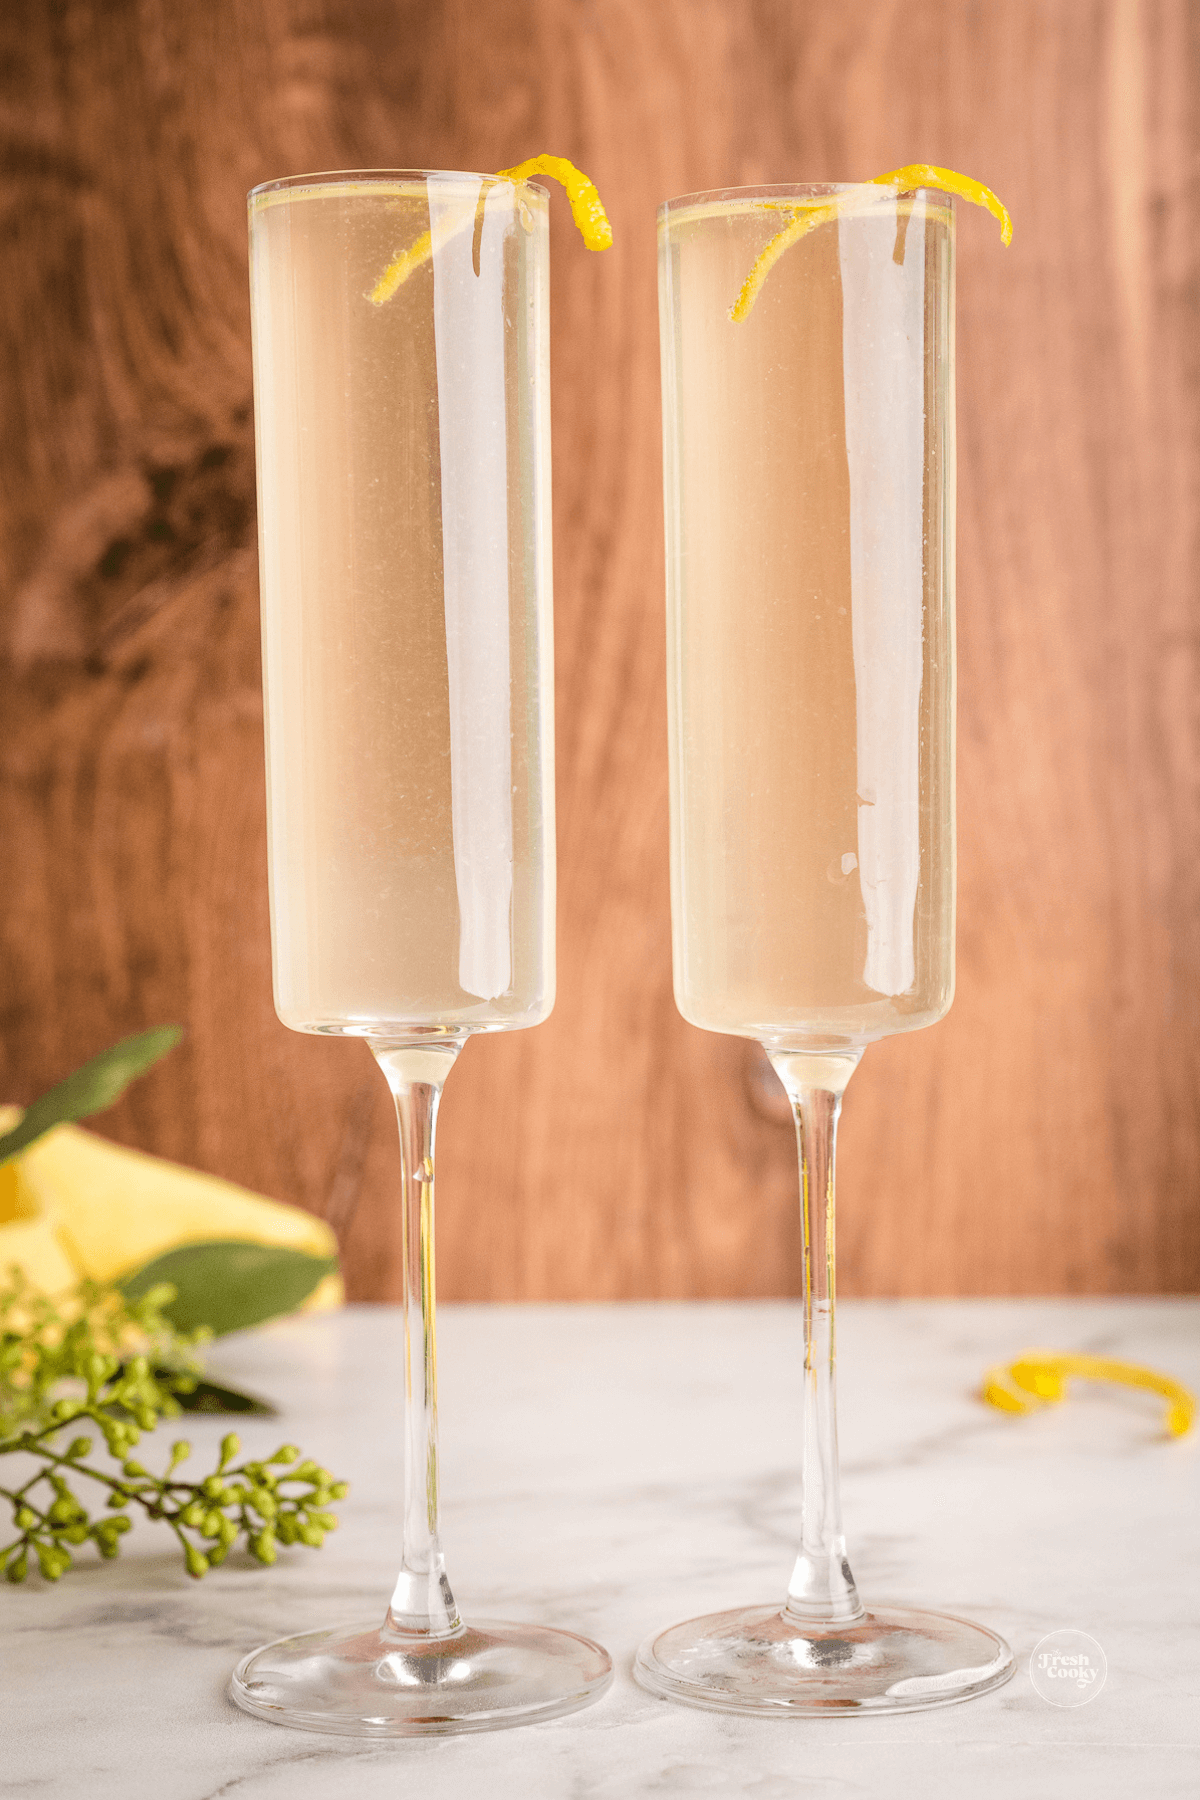 Gorgeous champagne flutes filled with French 75 recipe with St Germain and a lemon twist.